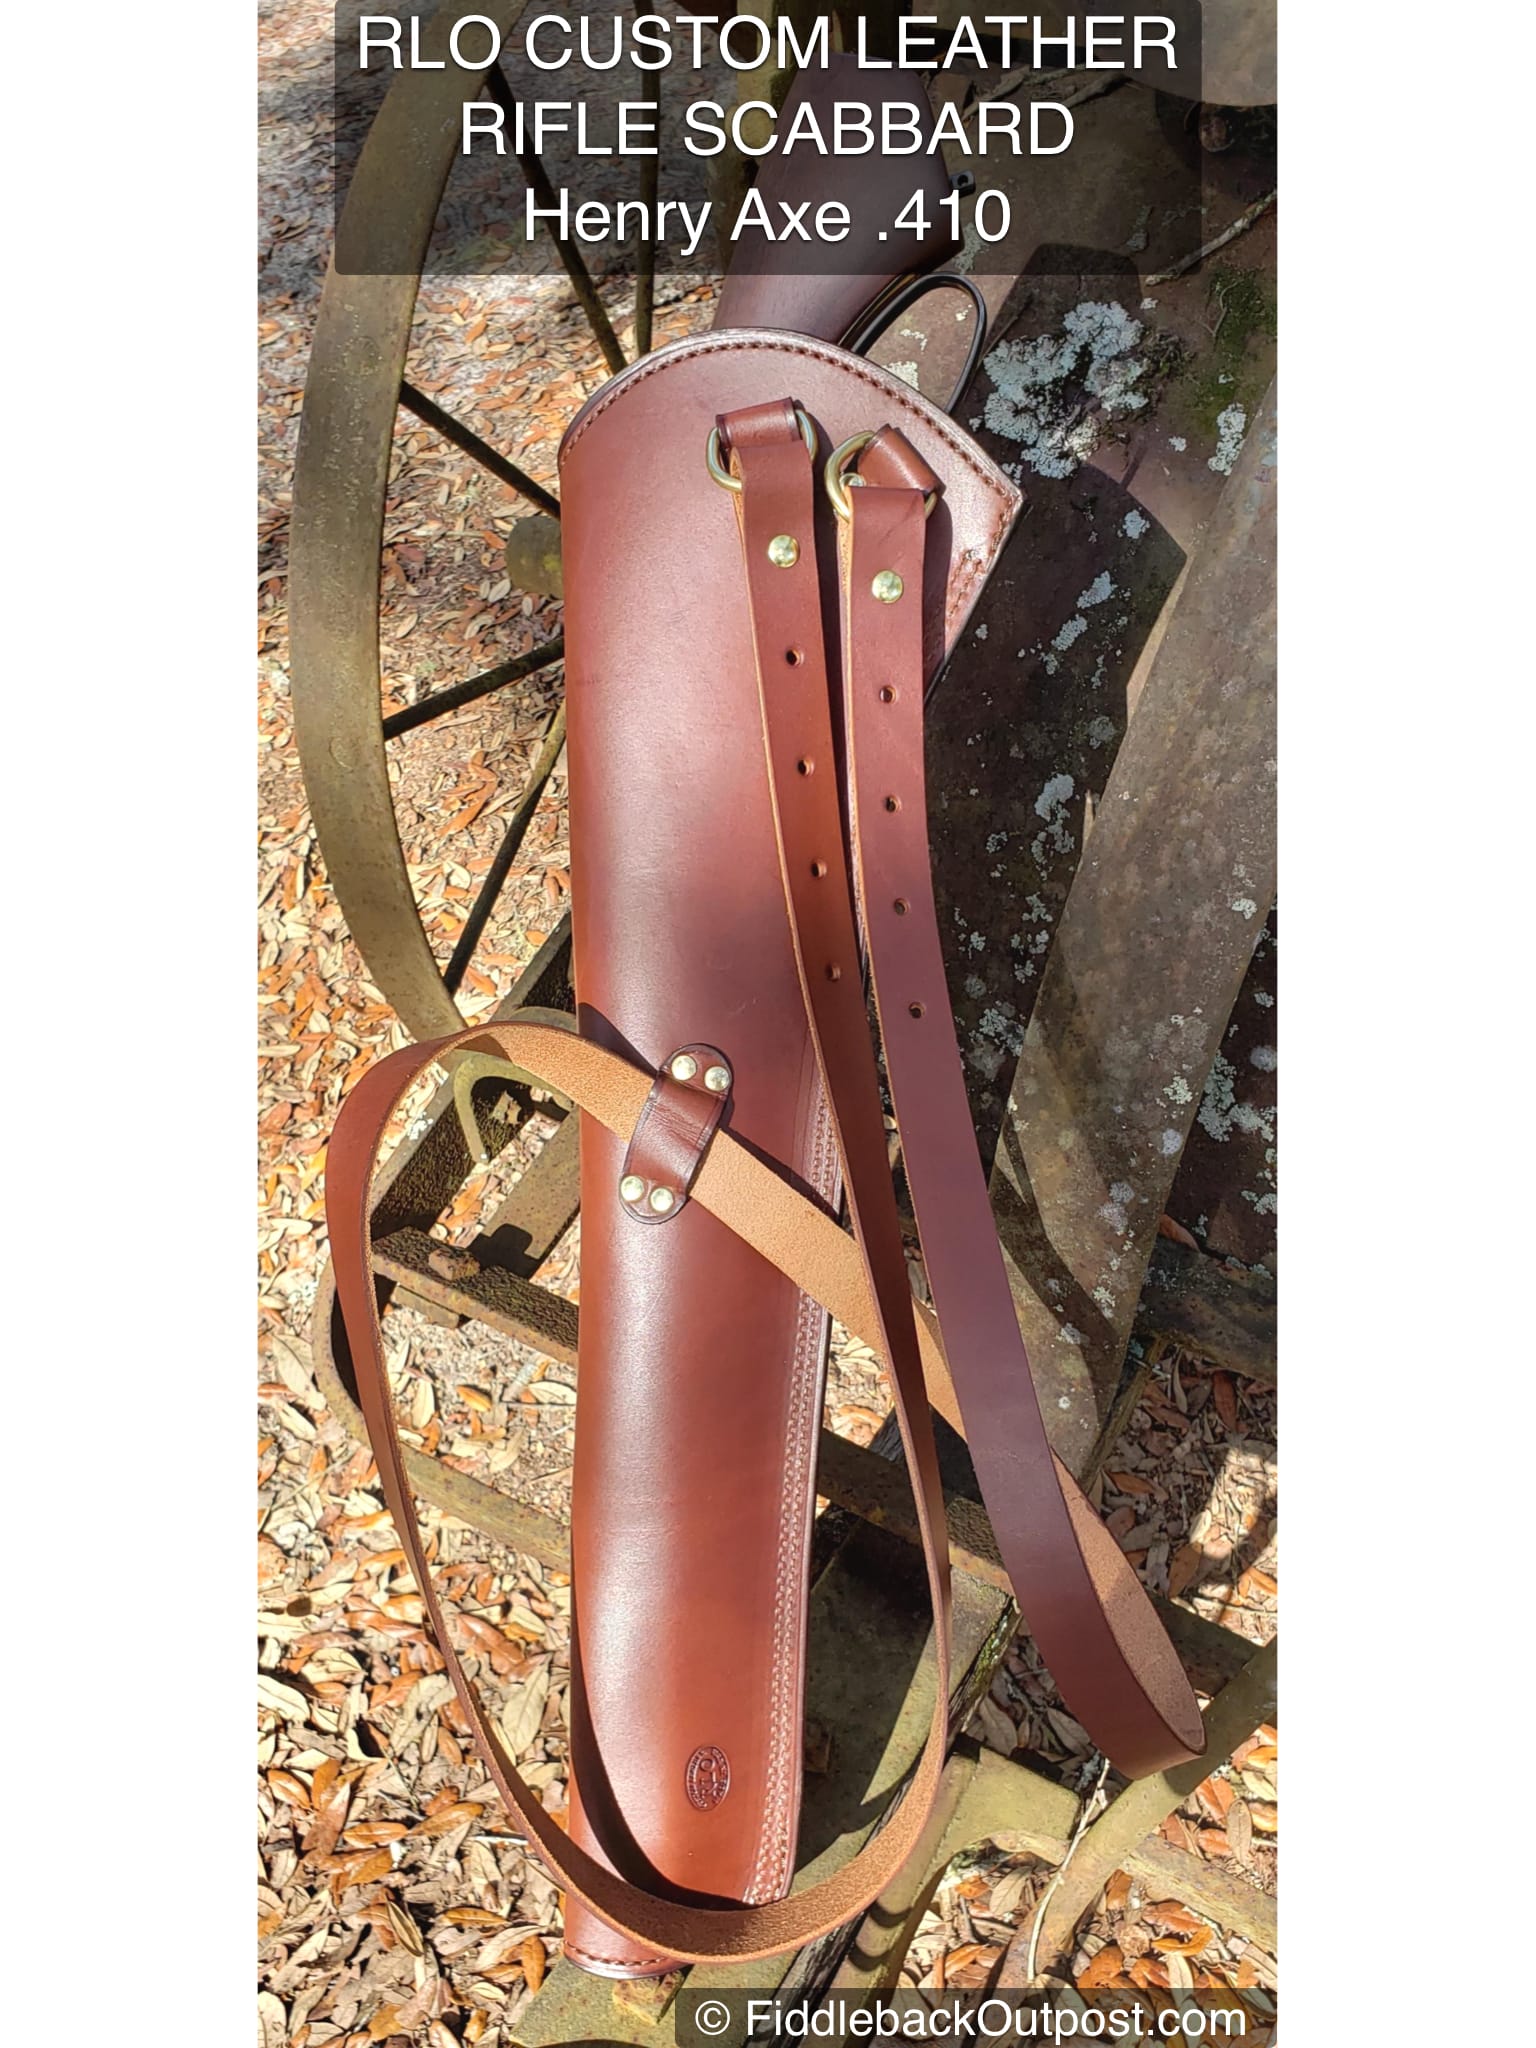 Rifle scabbard for lever action rifle marlin lever action accessories  motorcycle